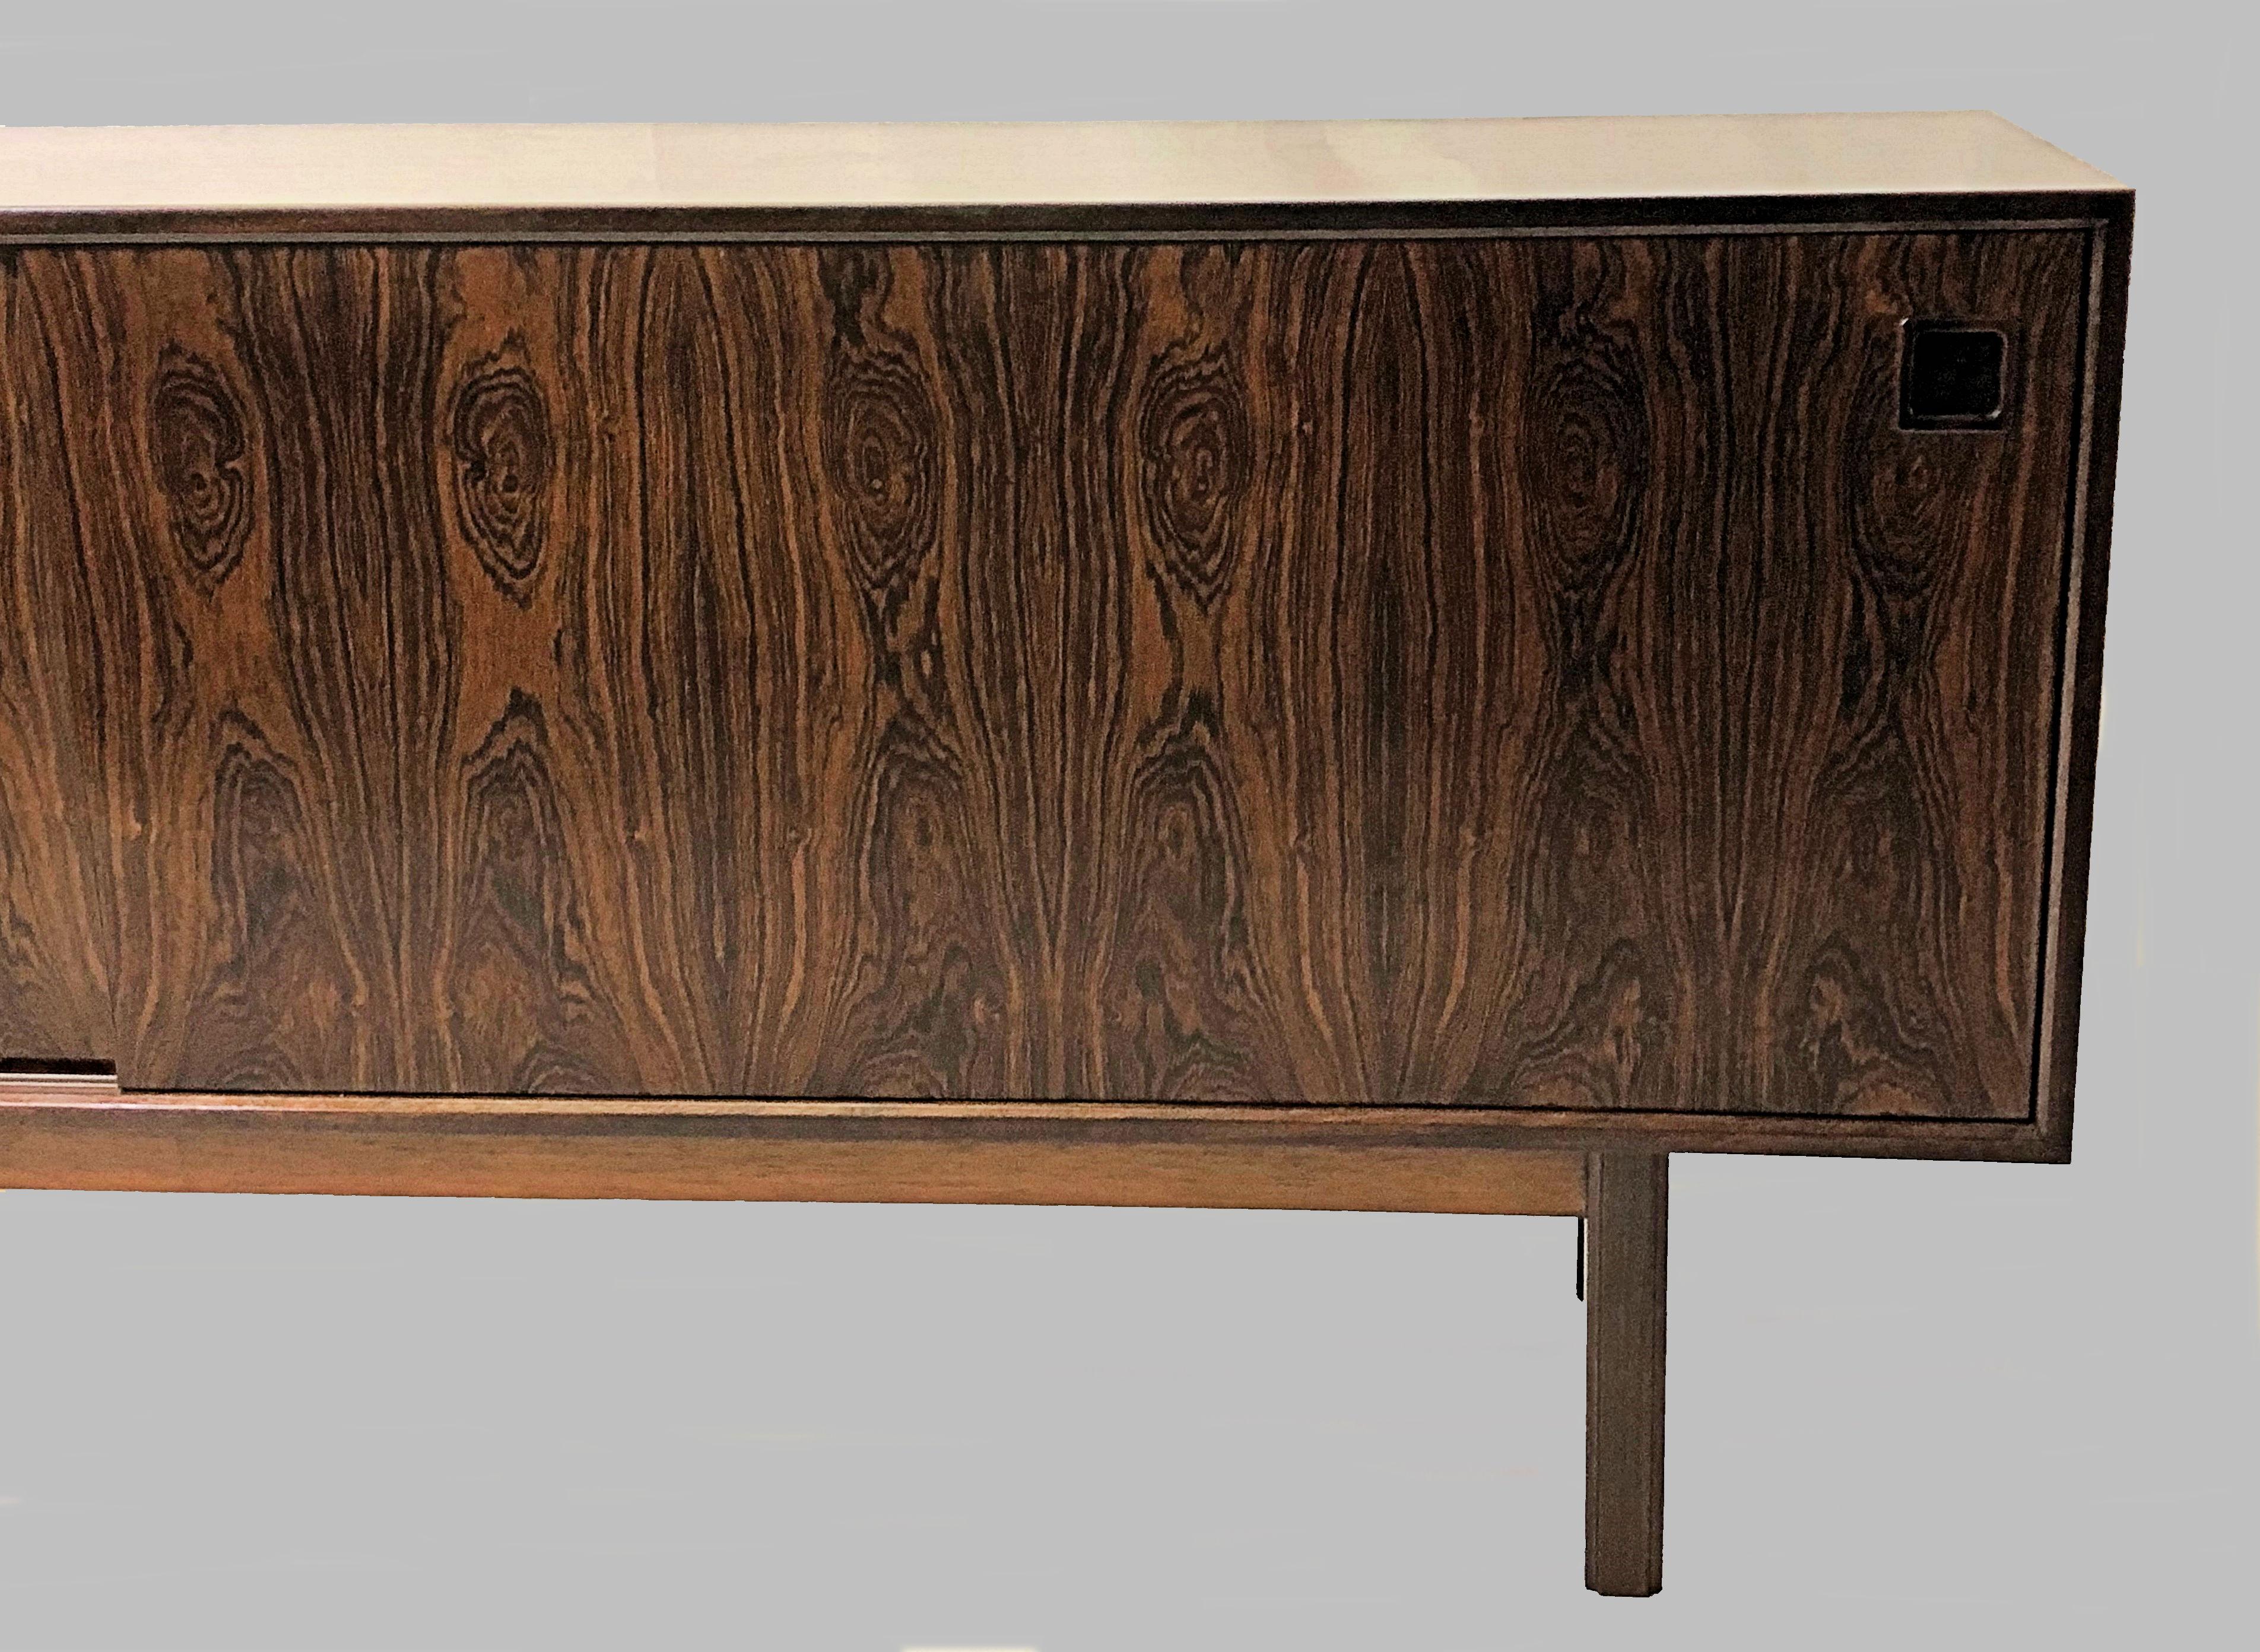 Spacious 1960s sideboard in rosewood designed and produced by Omann Jun.

The sideboard has been owned by the same owner since the 1960s and is in very good condition.
 